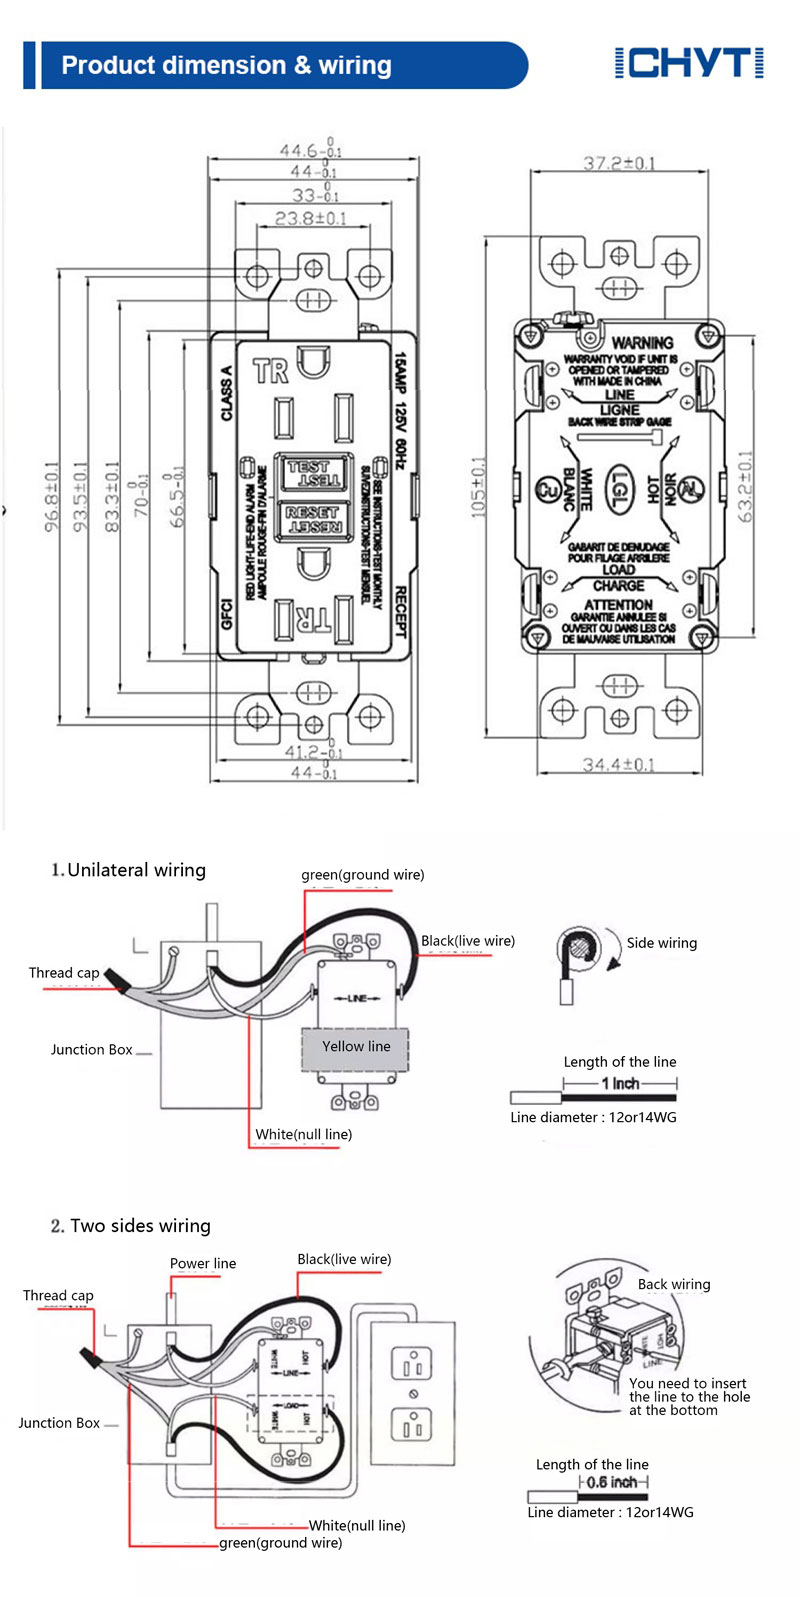 white kitchen gfci device outlet Dimensions and wiring